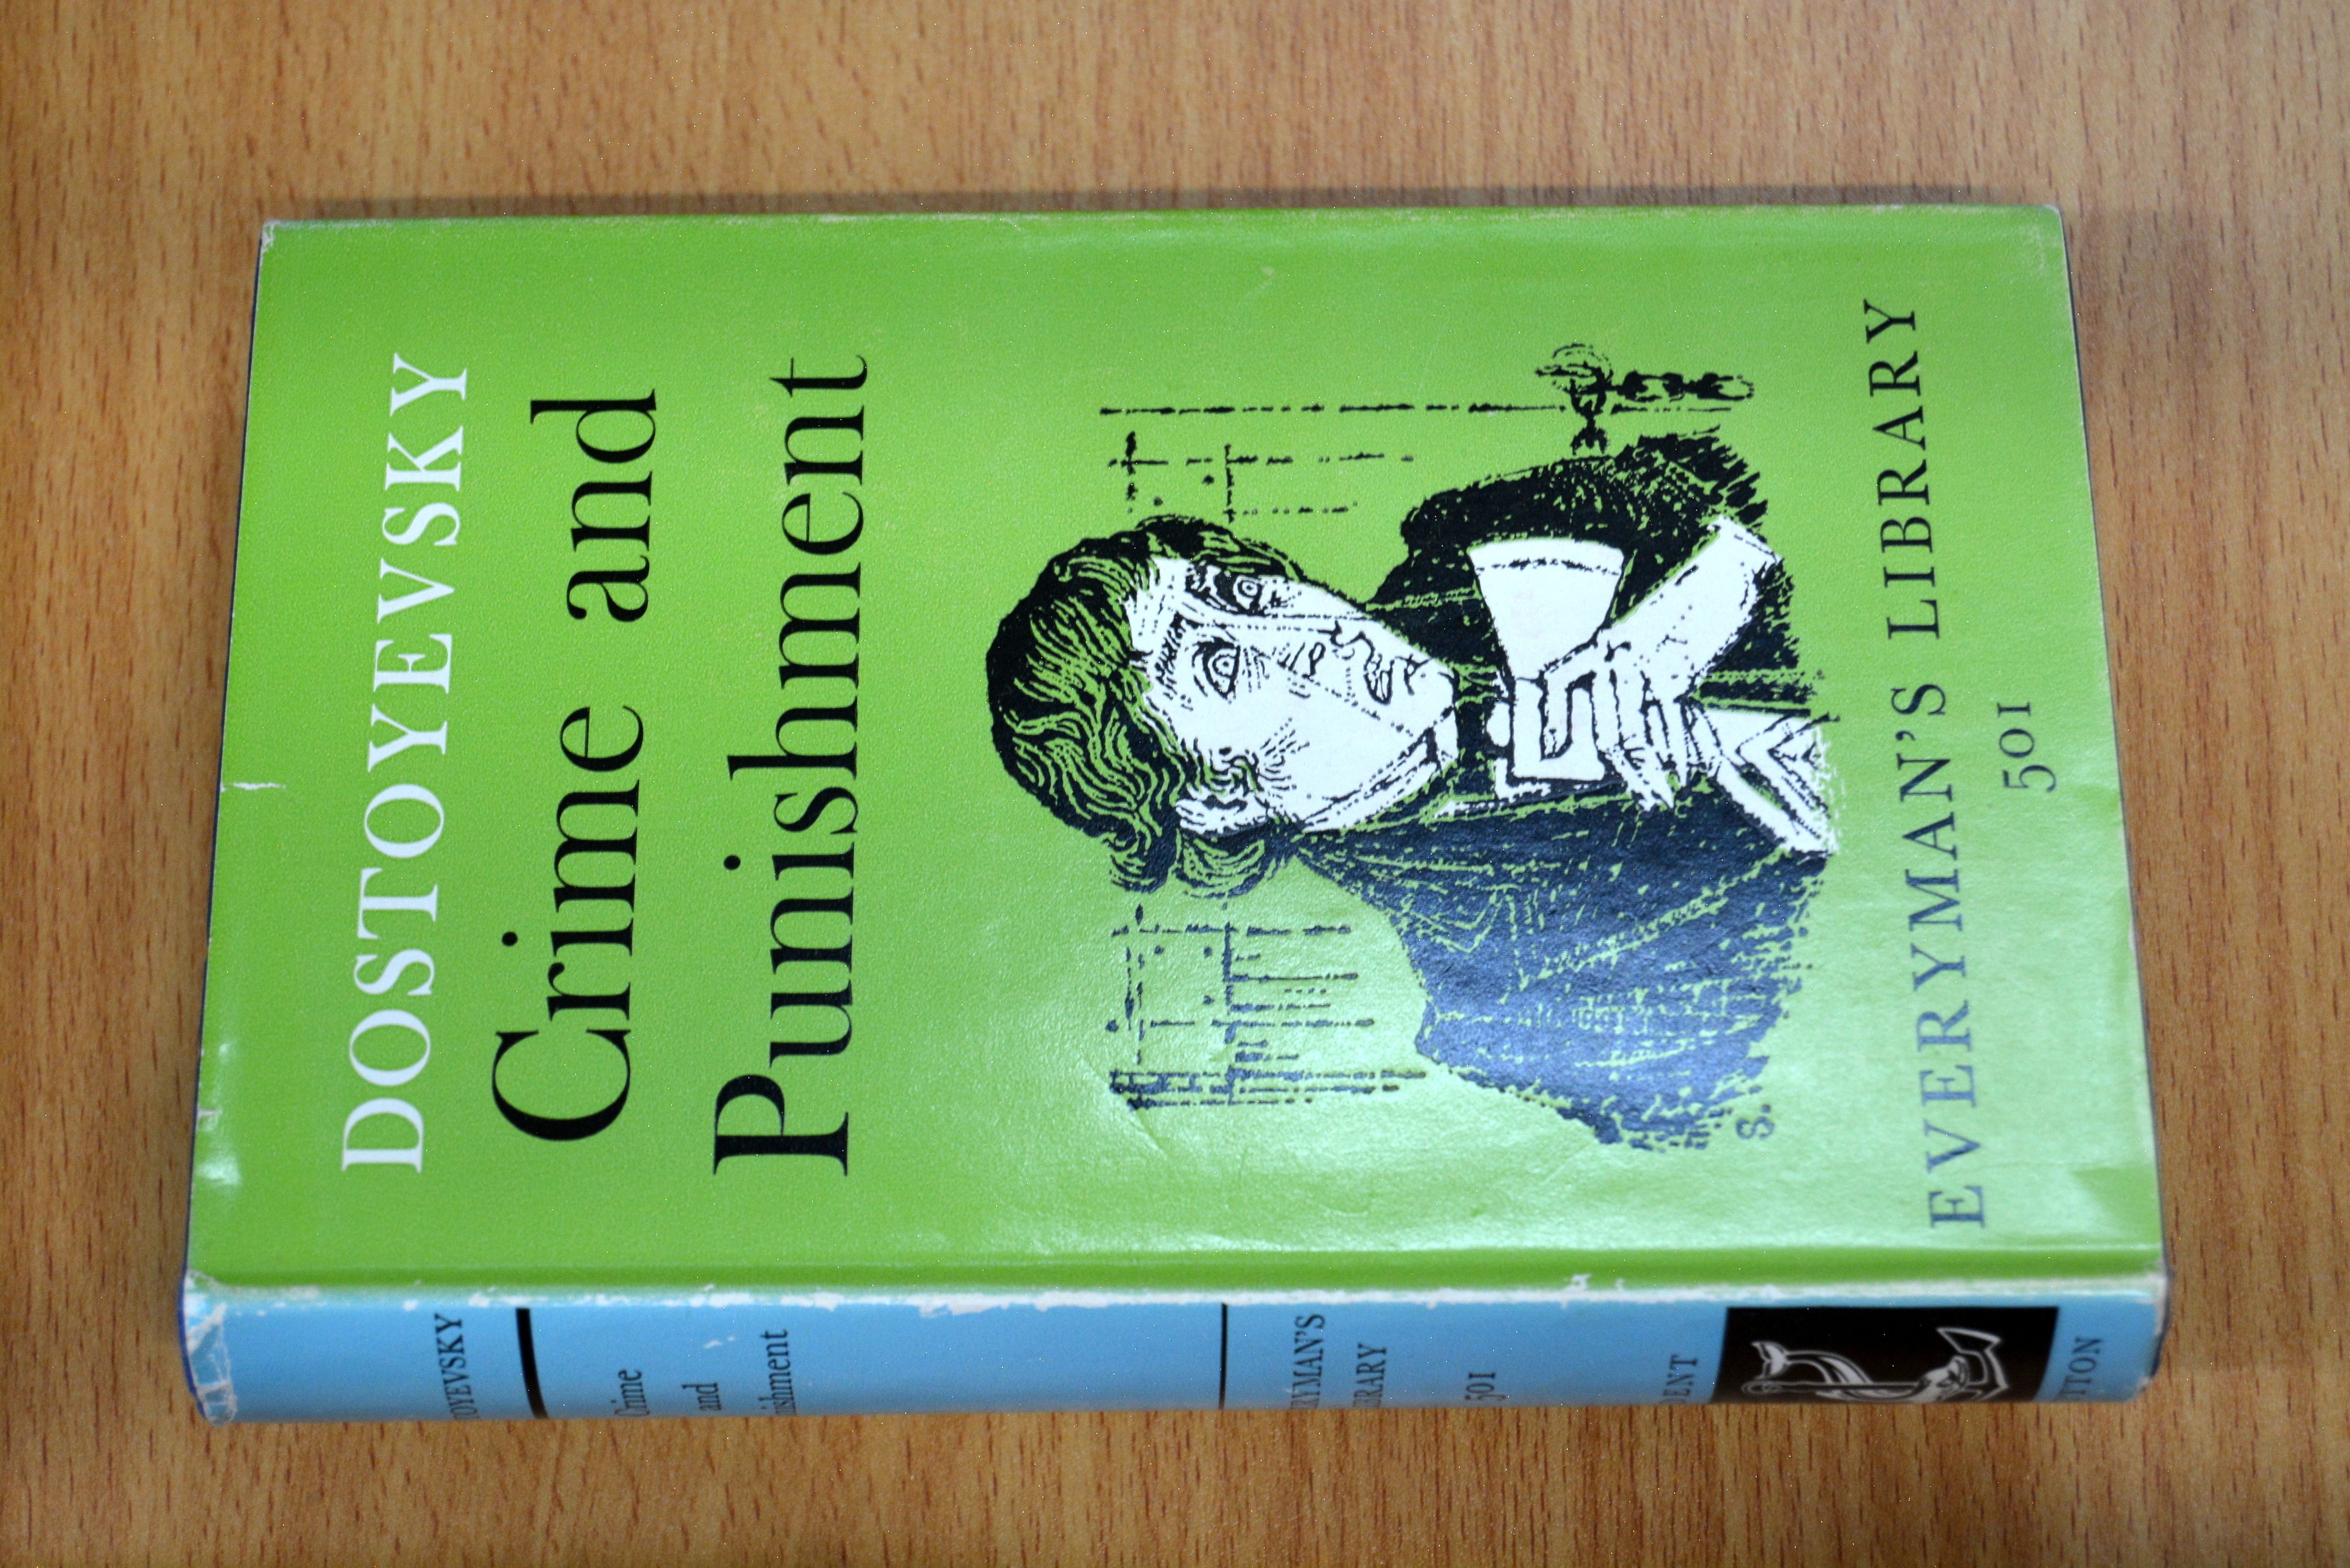 Crime and Punishment (Everyman's Library 501) by Fyodor